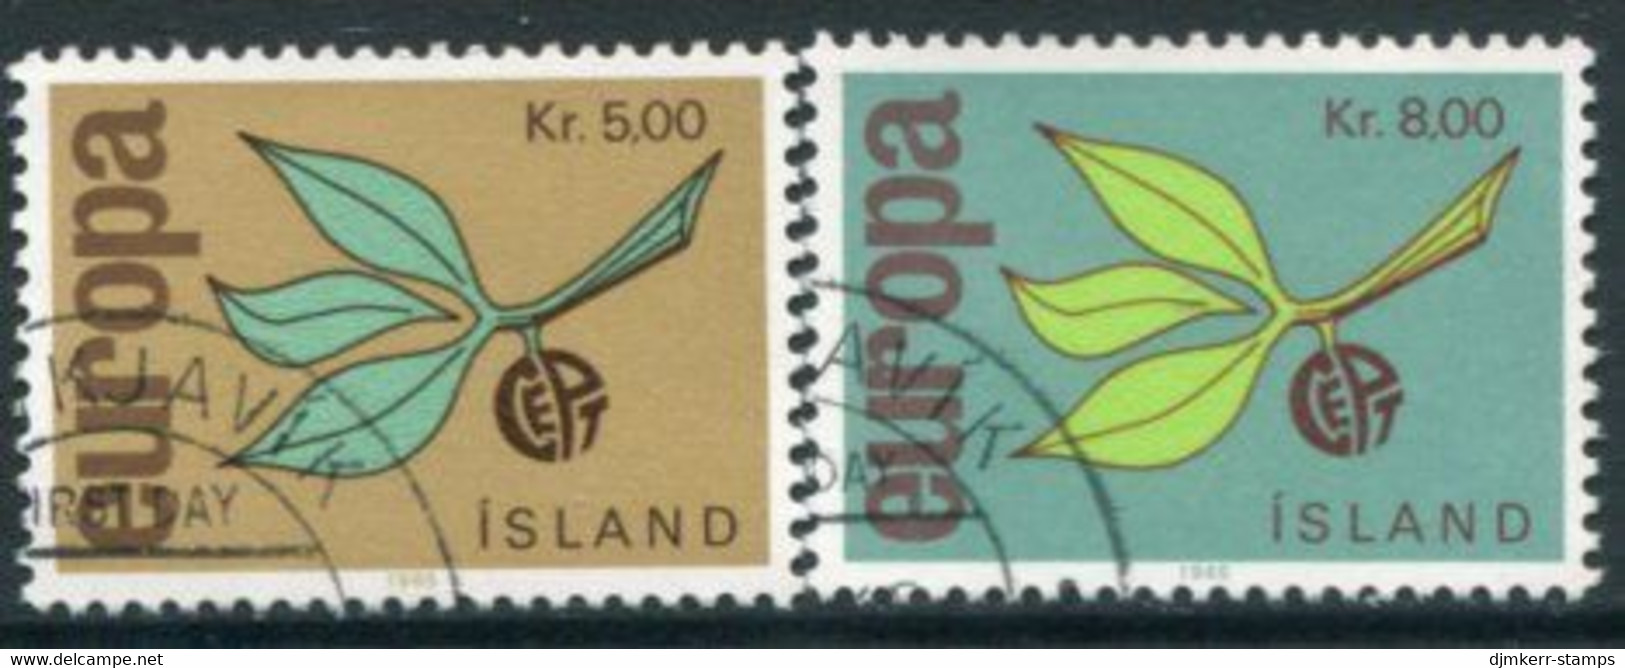 ICELAND 1965 Europa  Used.  Michel 395-96 - Used Stamps